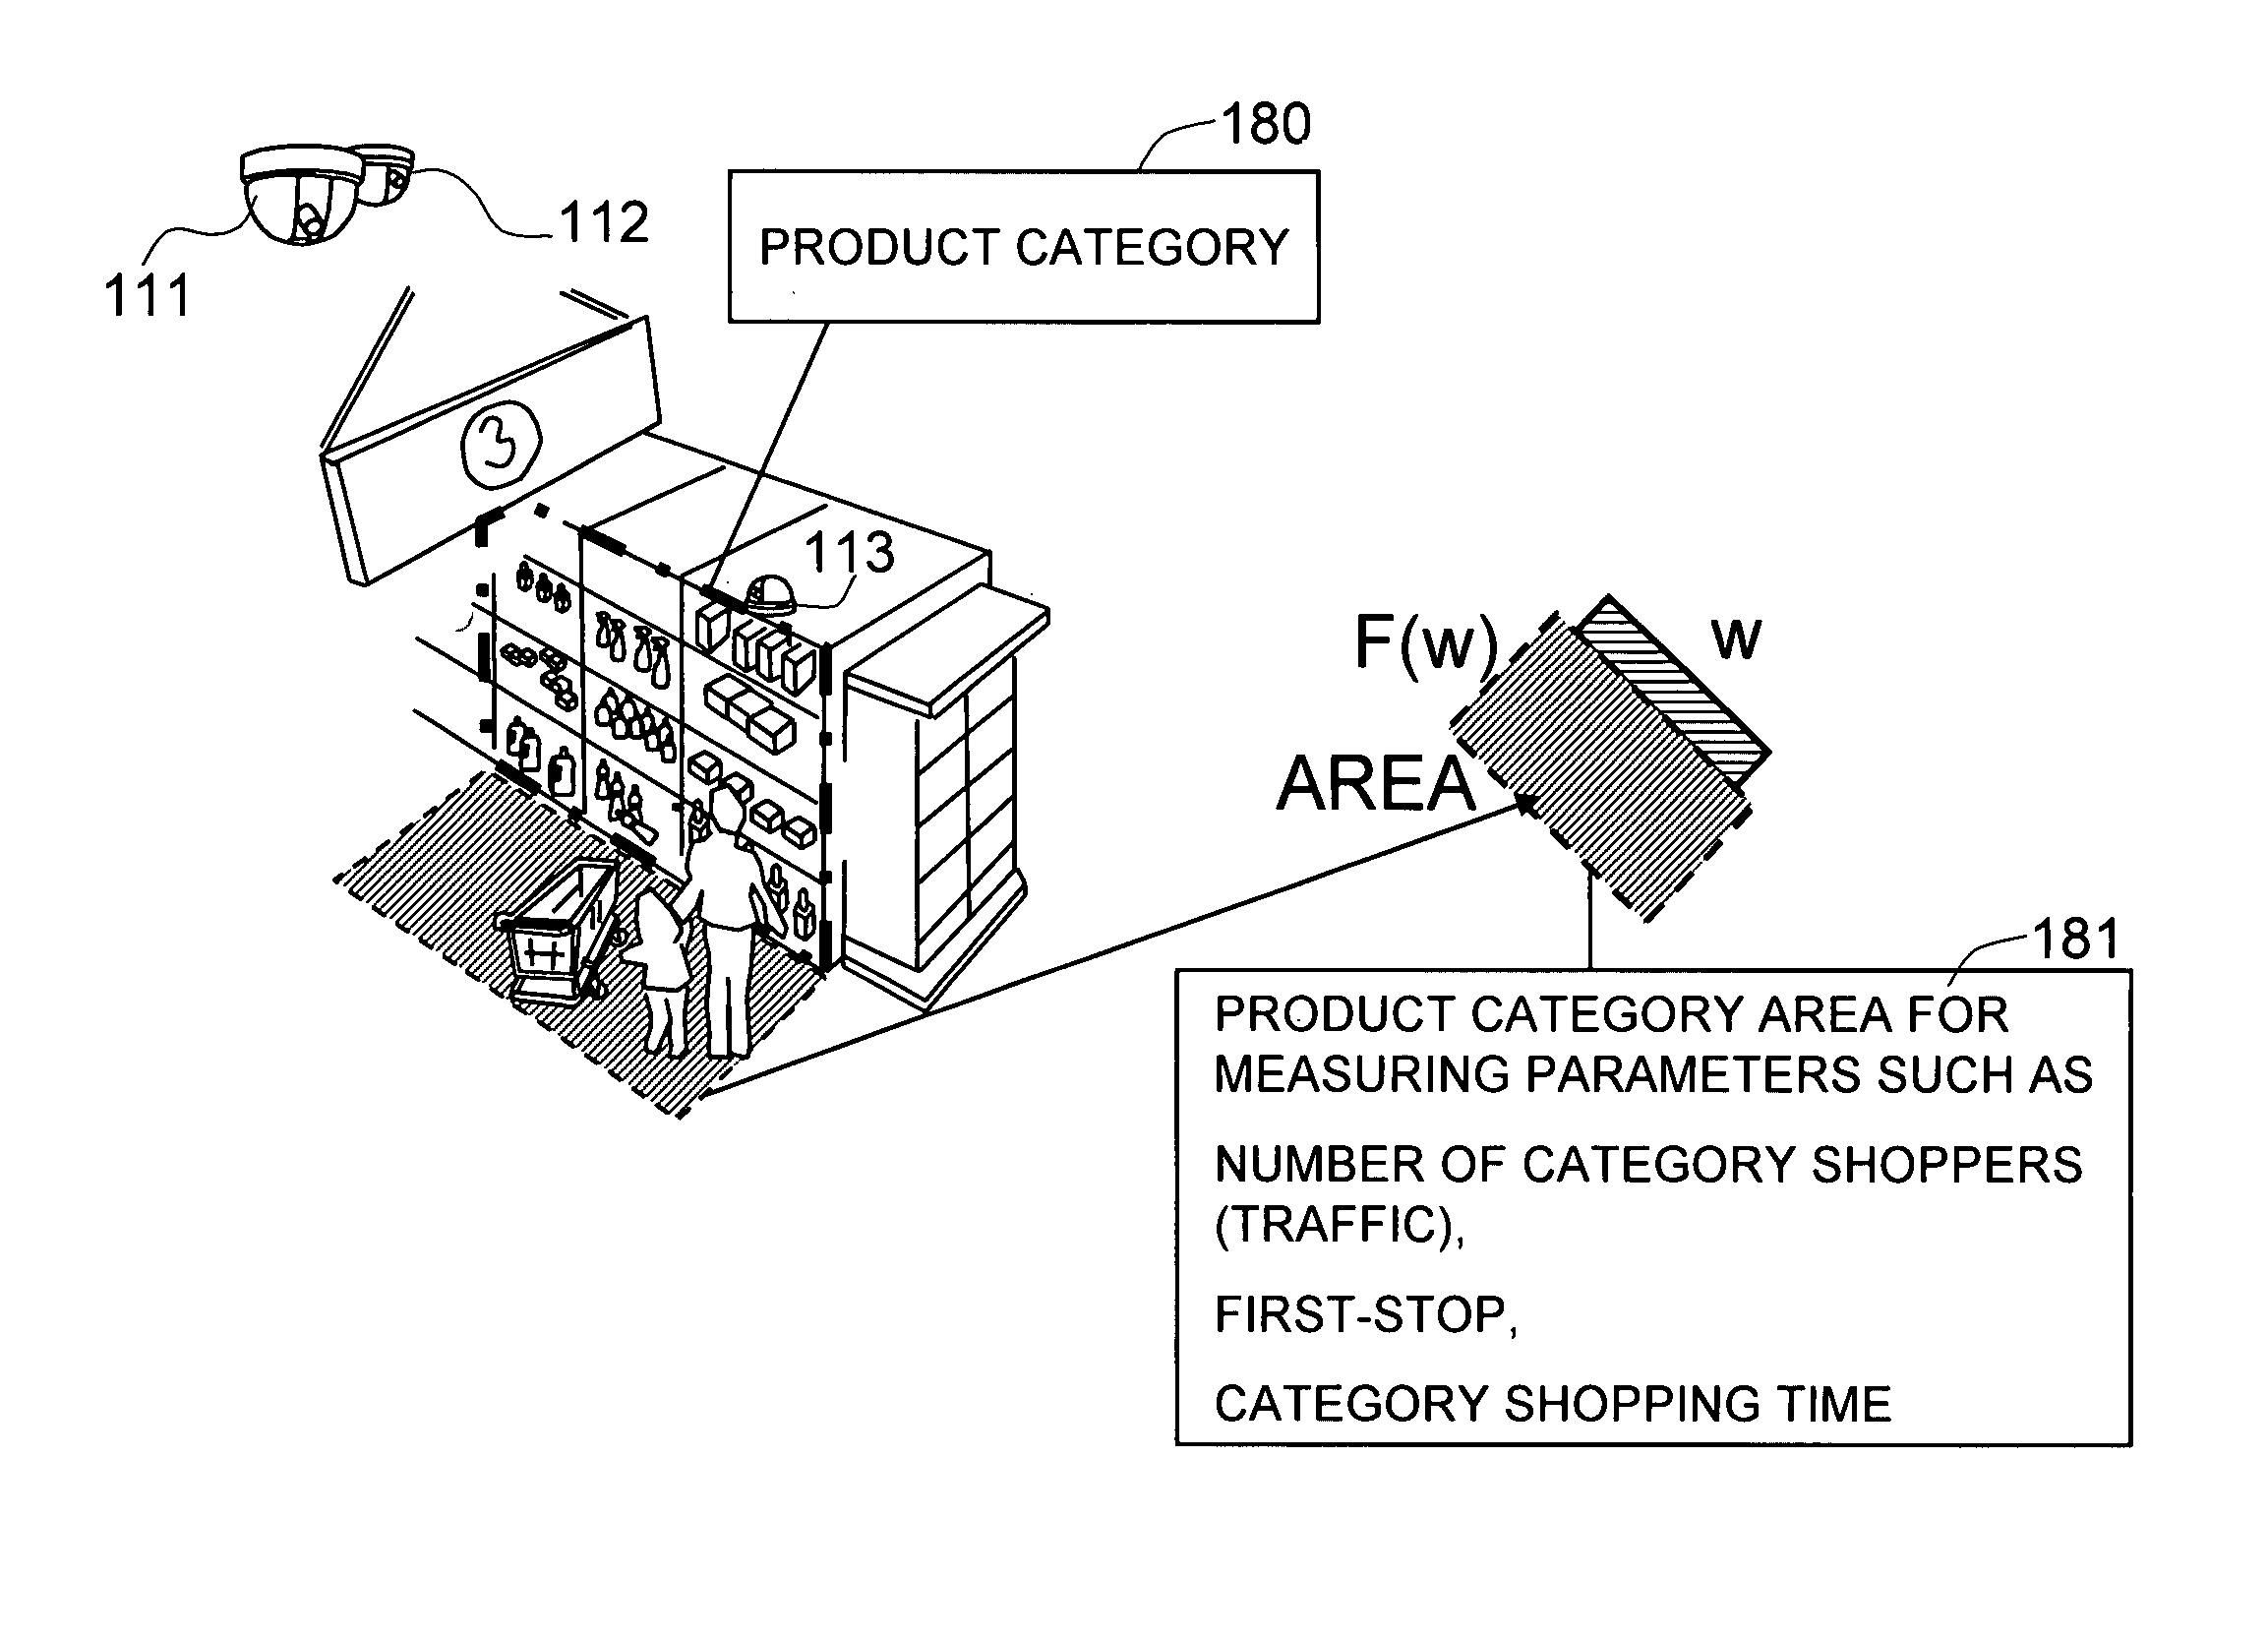 Method and system for rating the role of a product category in the performance of a store area